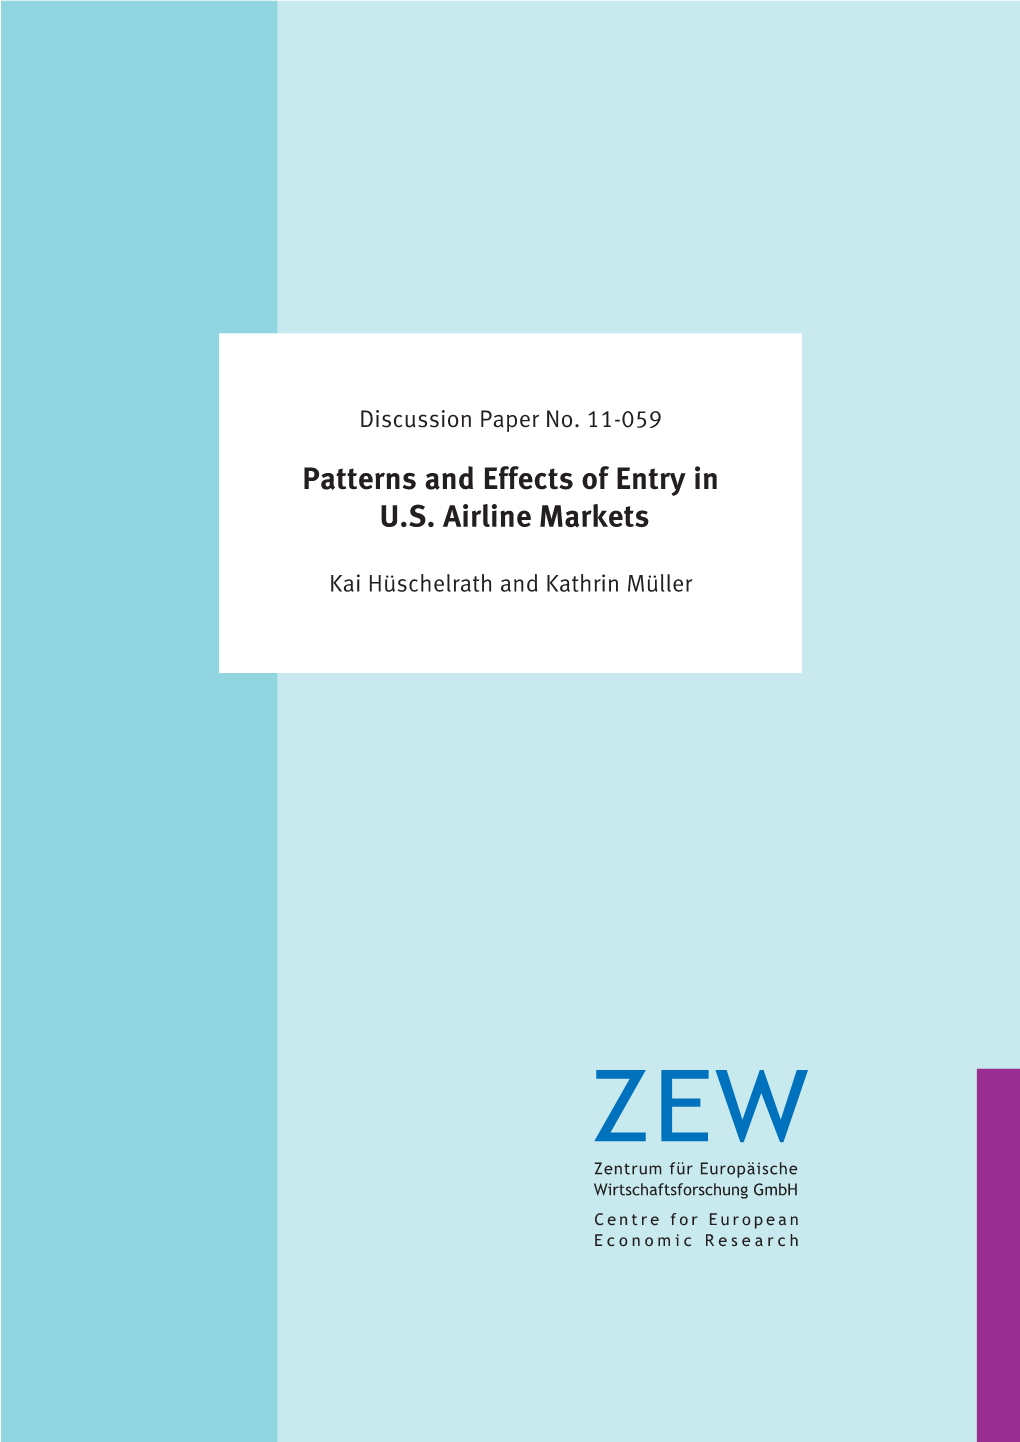 Patterns and Effects of Entry in U.S. Airline Markets